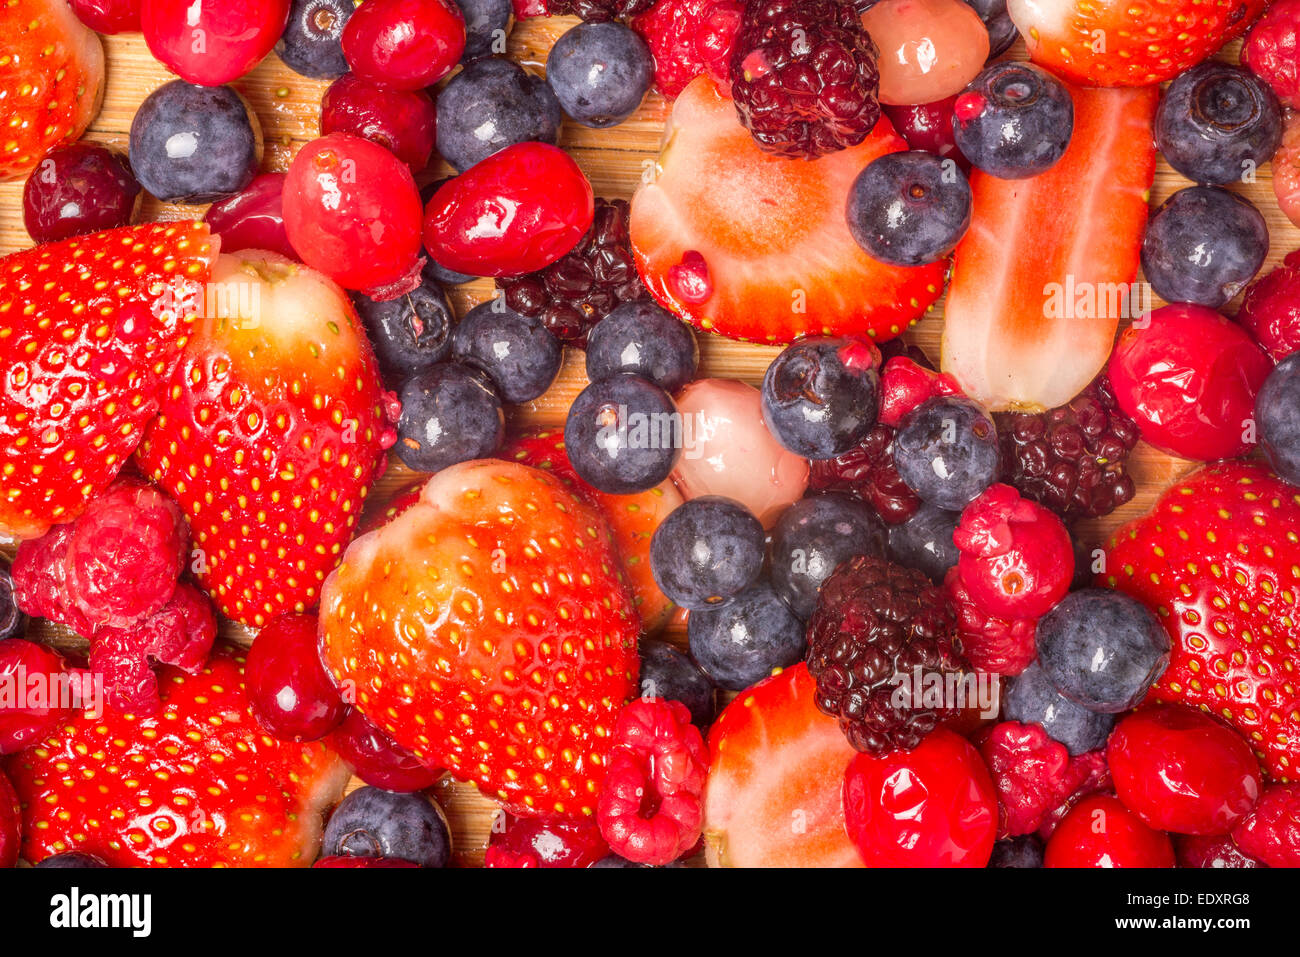 Mixed berries viewed from above as they lie spread out on a bamboo cutting board. Stock Photo